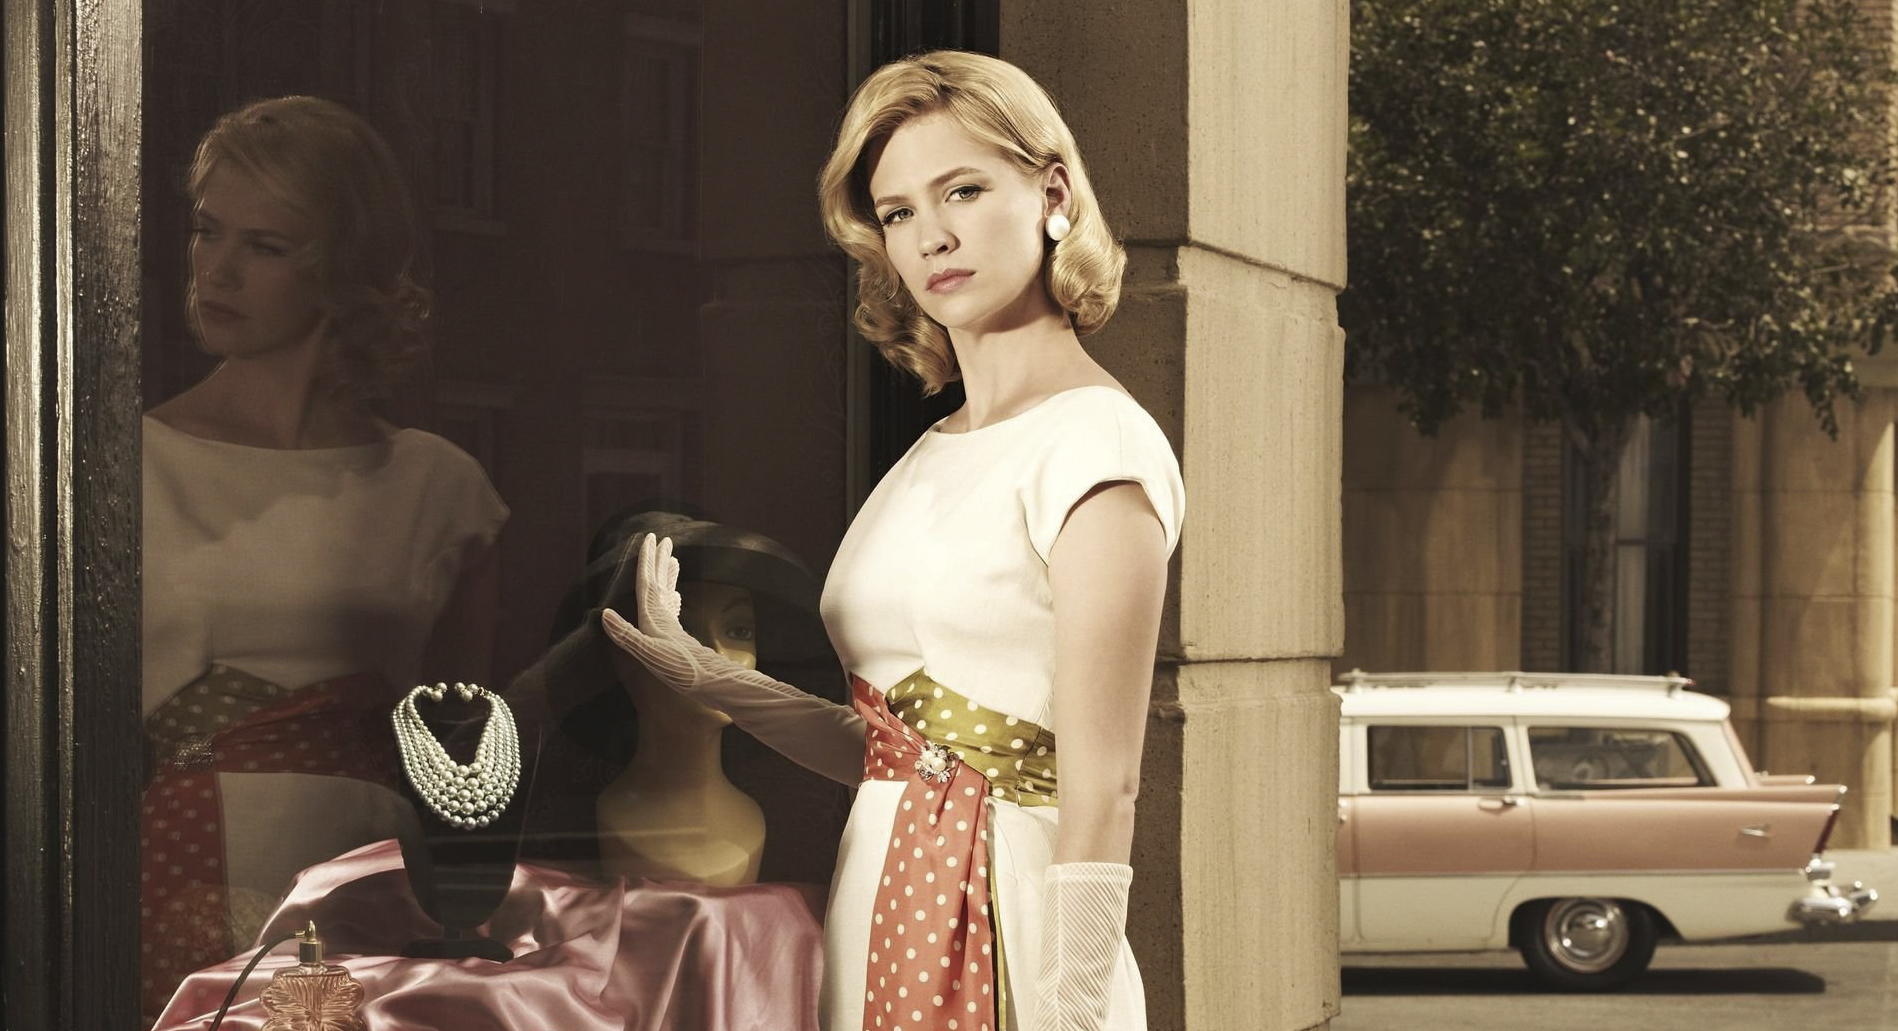 Children and their feelings were neglected well into the 1960s. Betty Francis (played by January Jones) in the television series Mad Men was probably typical of her era.